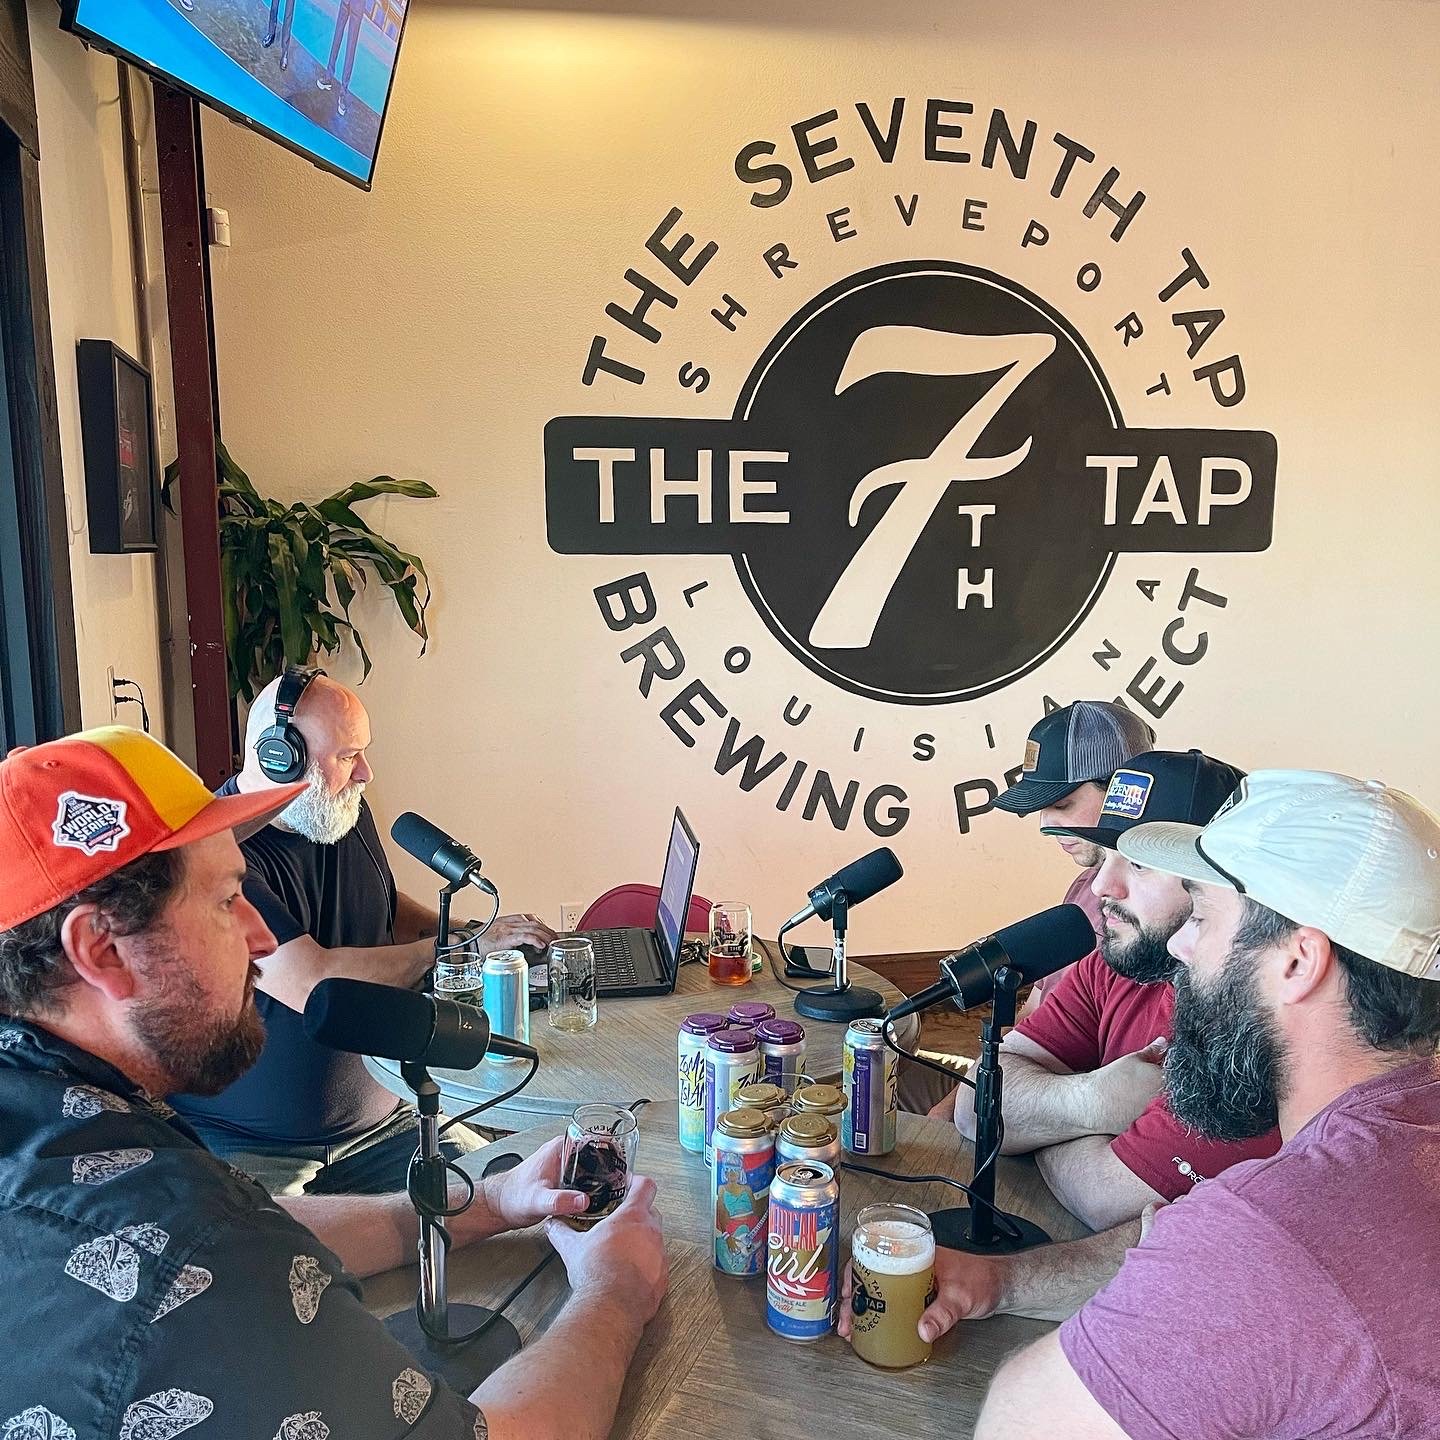 abv podcast at seventh tap.JPG